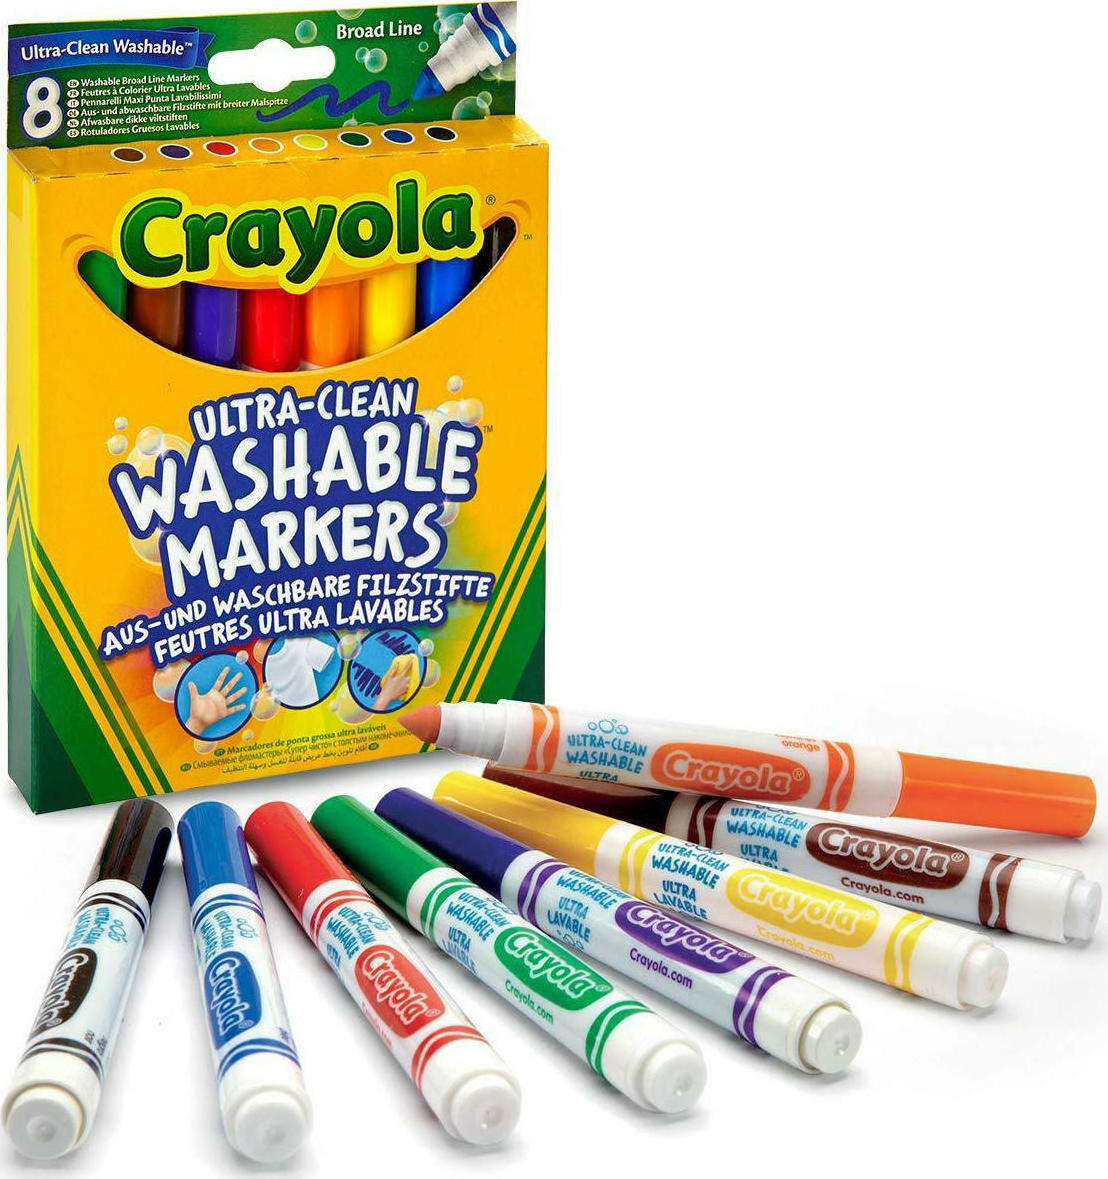  Crayola 58-8328-E-000 Ultra-Clean Washable Markers : Video Games